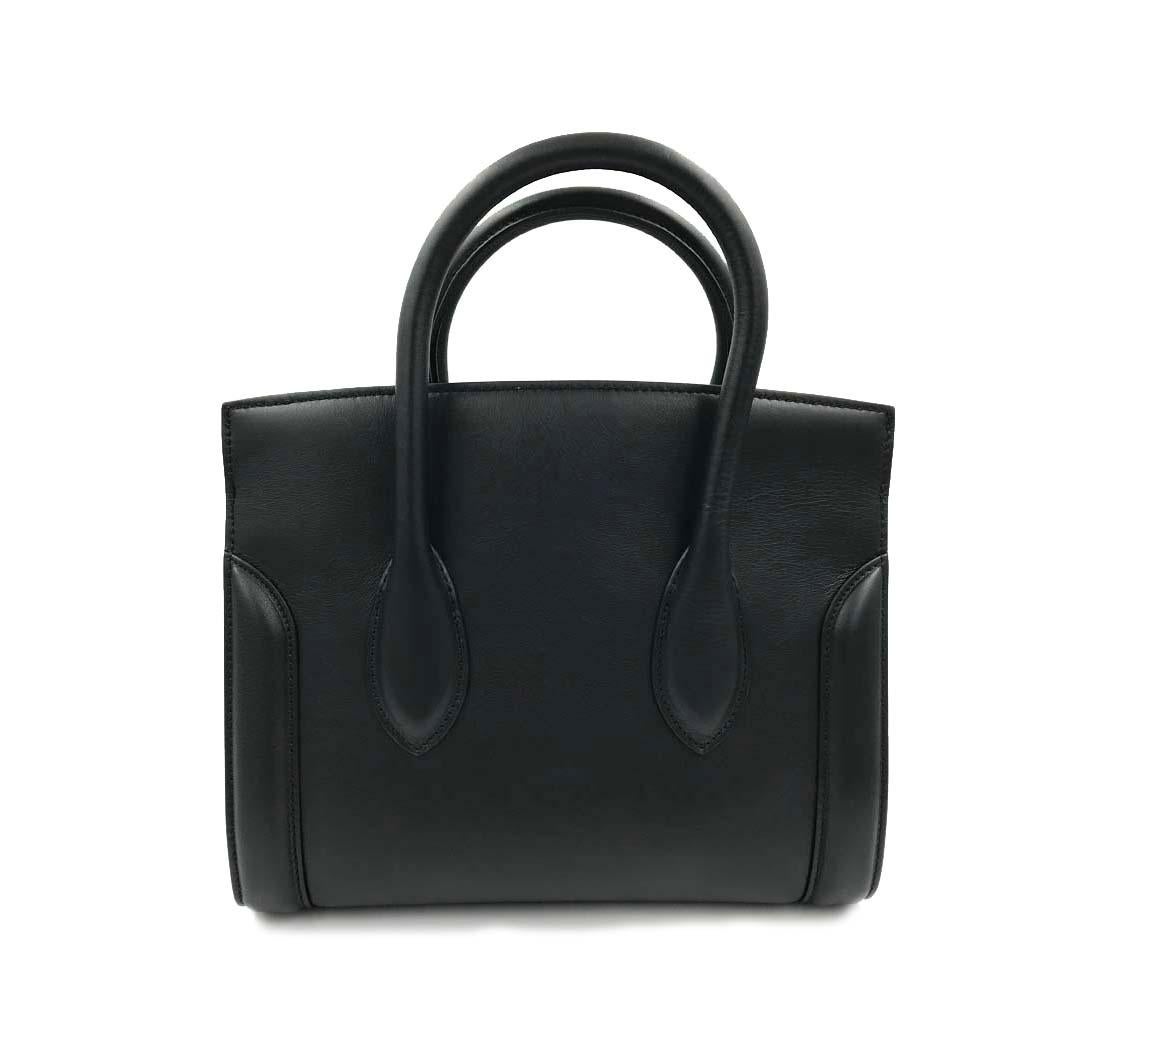 Alexander McQueen Heroine 30 Medium Leather Shoulder Bag 508859DX50M In Excellent Condition For Sale In New York, NY